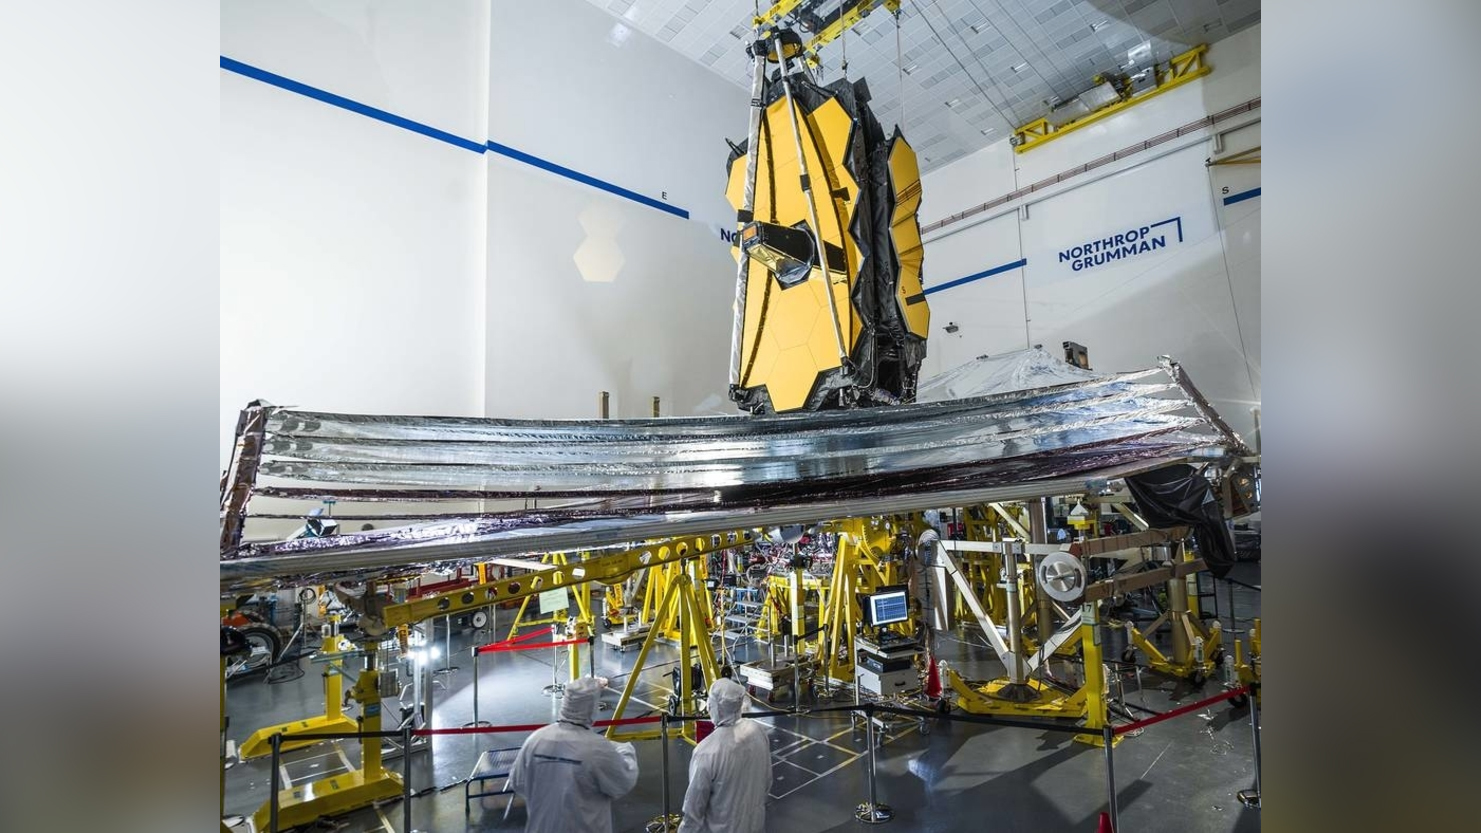 James Webb Space Telescope completes tricky sunshield deployment thumbnail